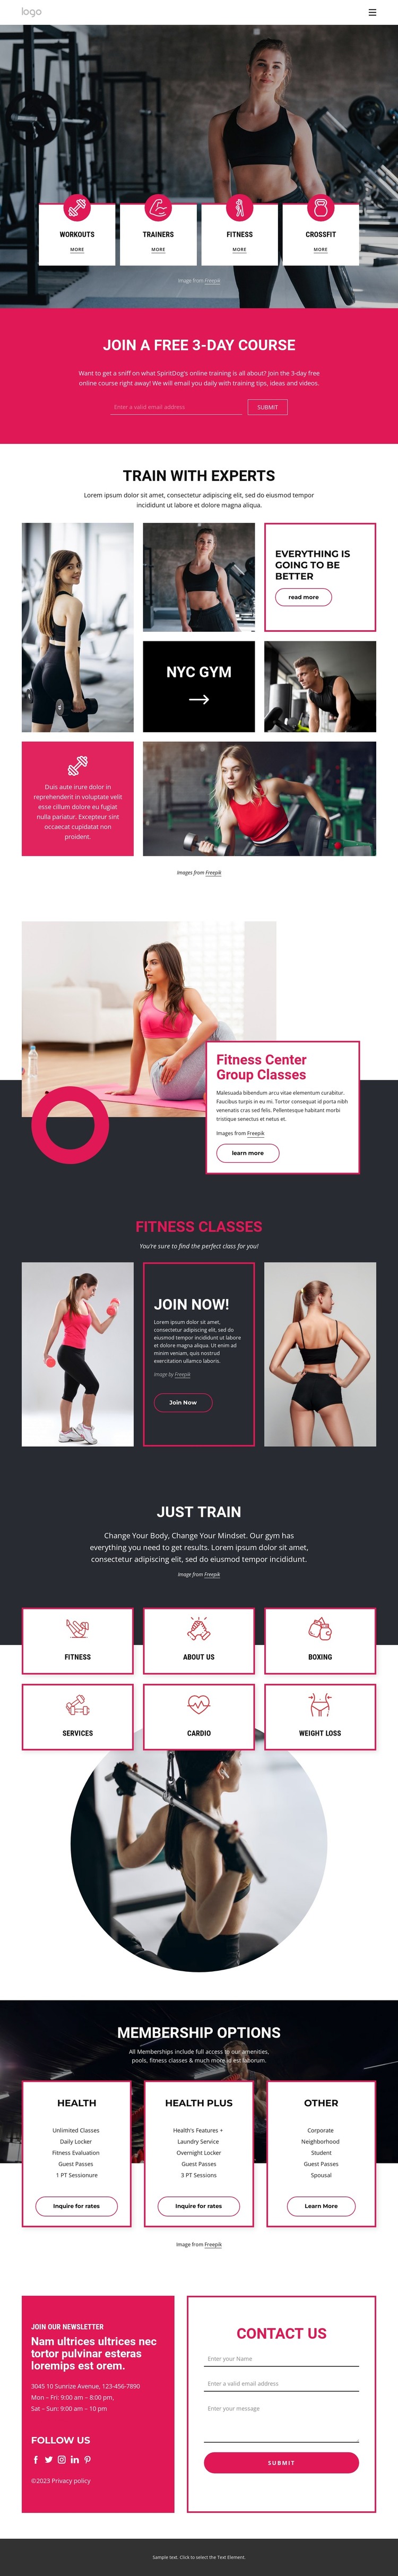 Join a Crossfit gym Web Design